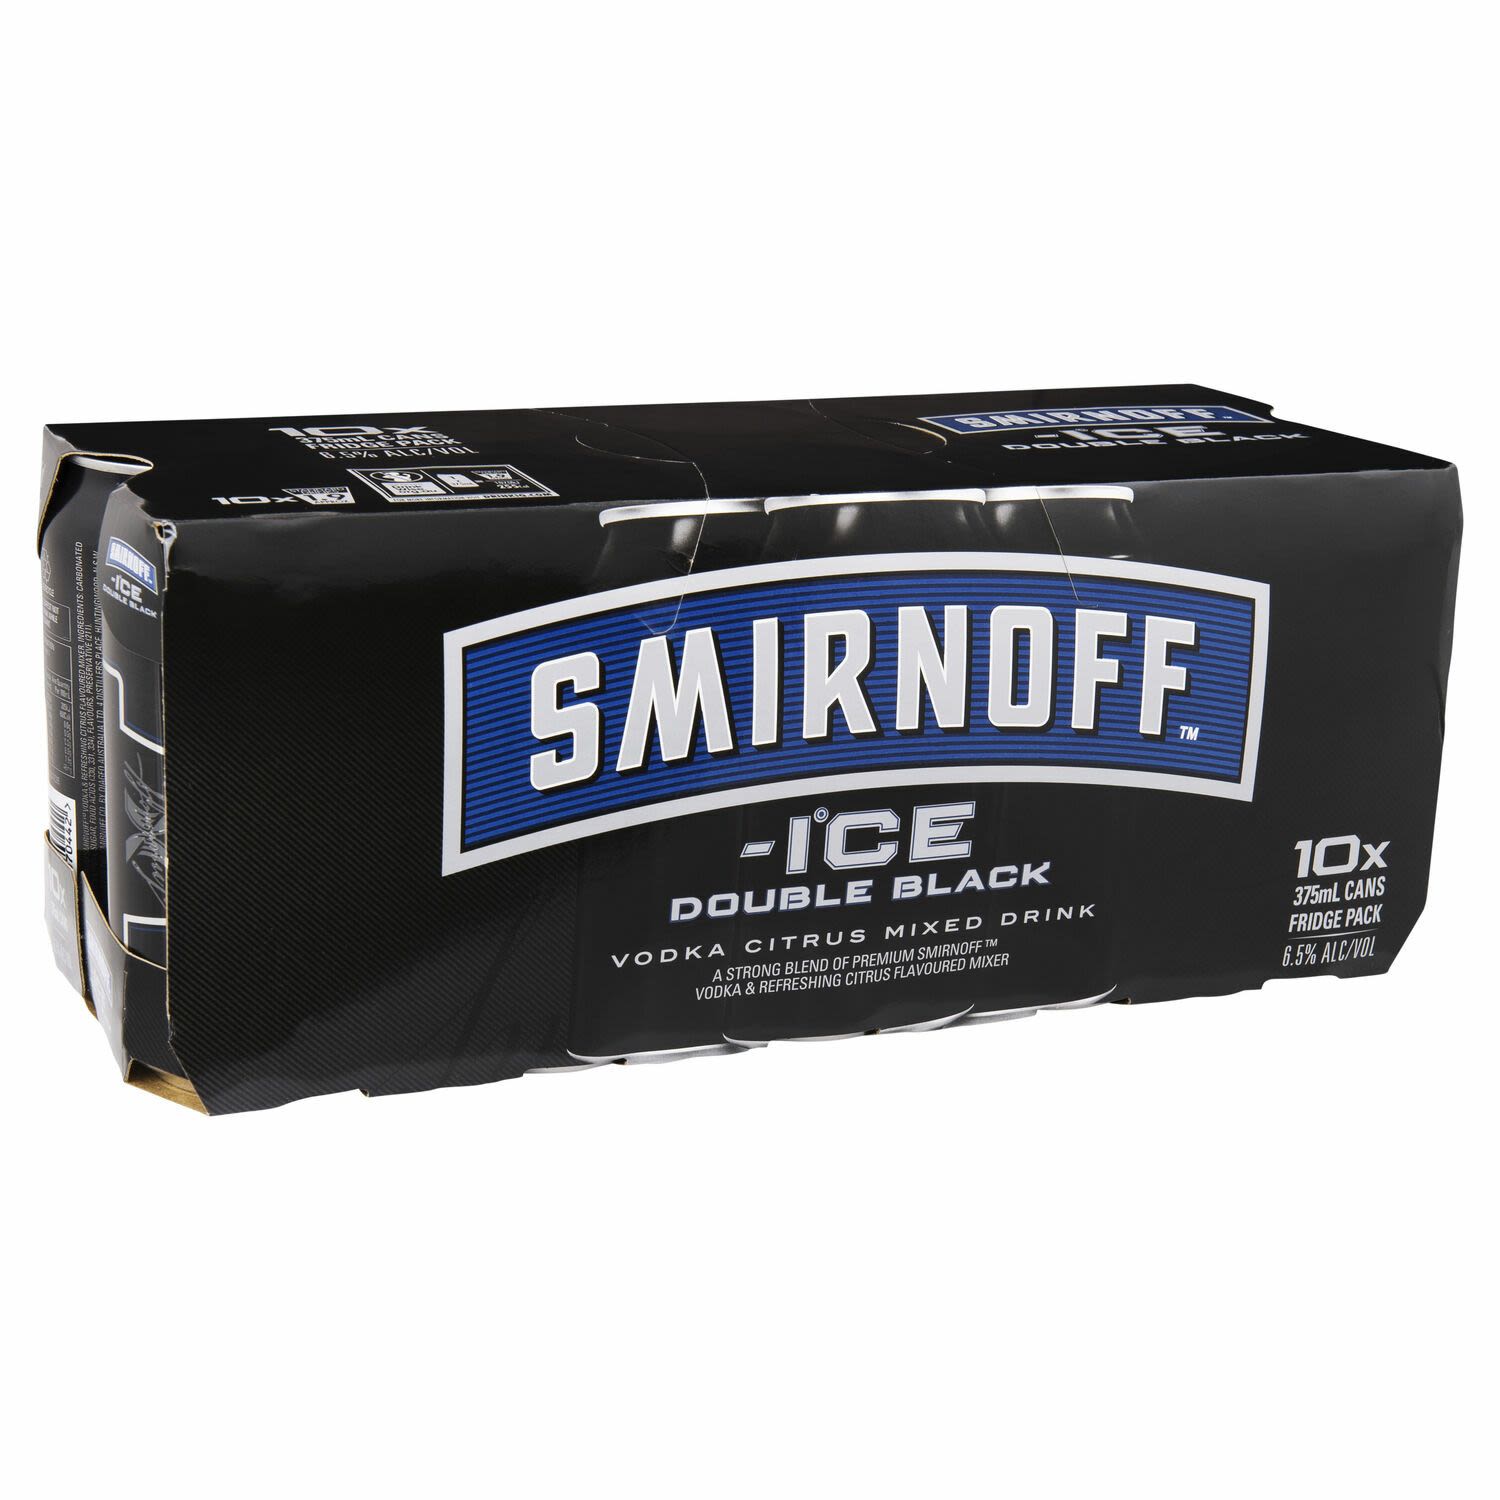 Smirnoff Ice Double Black Can 375mL 10 Pack